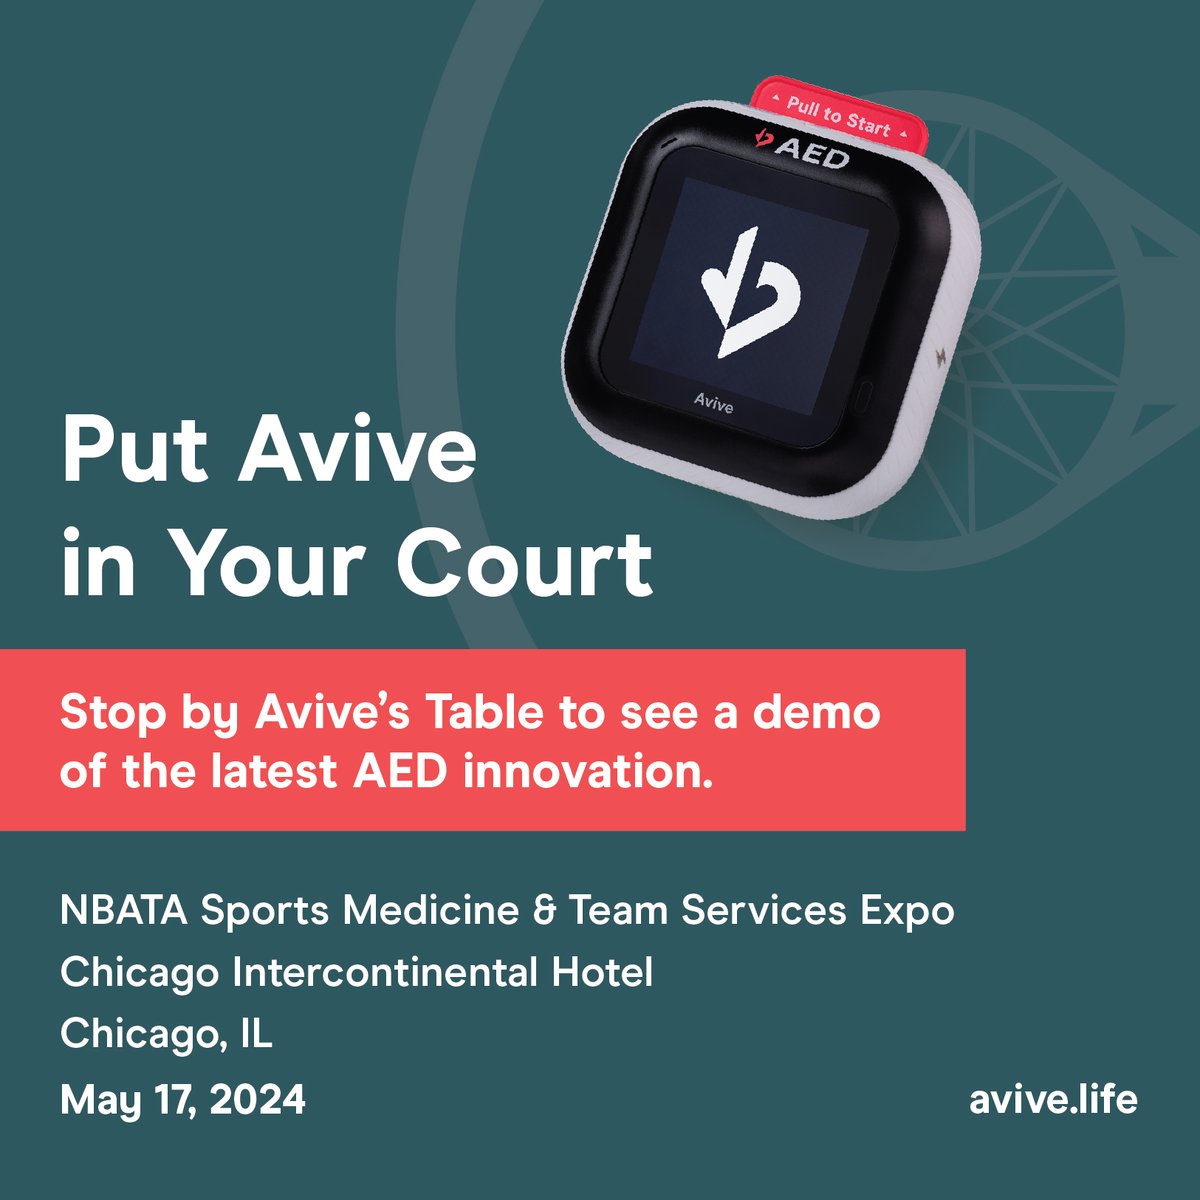 Privileged to attend this year's @NBATA Sports Medicine and Team Services Expo! 

Male basketball players have the highest risk of cardiac arrest across sports, and we're here to help your team stay prepared. #greATness #NBA #athletictraining